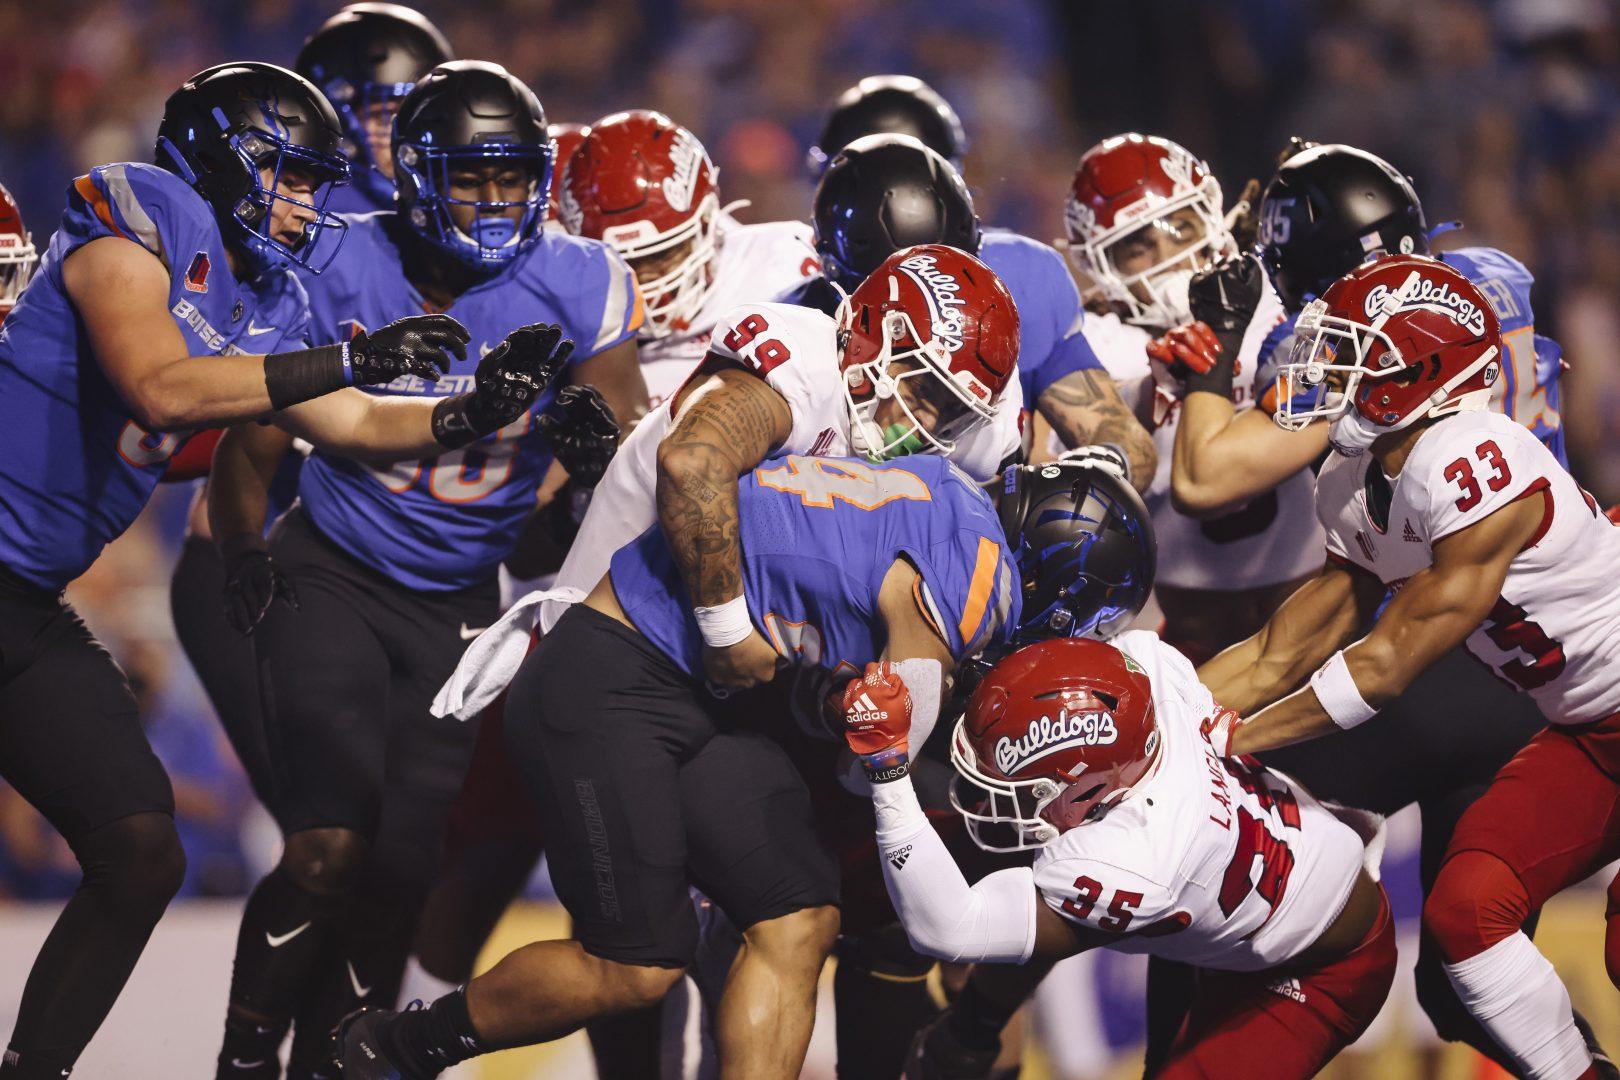 The Fresno State Bulldogs defeated the Boise State Broncos at Albertsons Stadium in Boise, Idaho on December 3, 2022. Photo of Fresno State playing against Boise State in Oct. 8 matchup. (Samuel Marshall/ Fresno State Athletics)